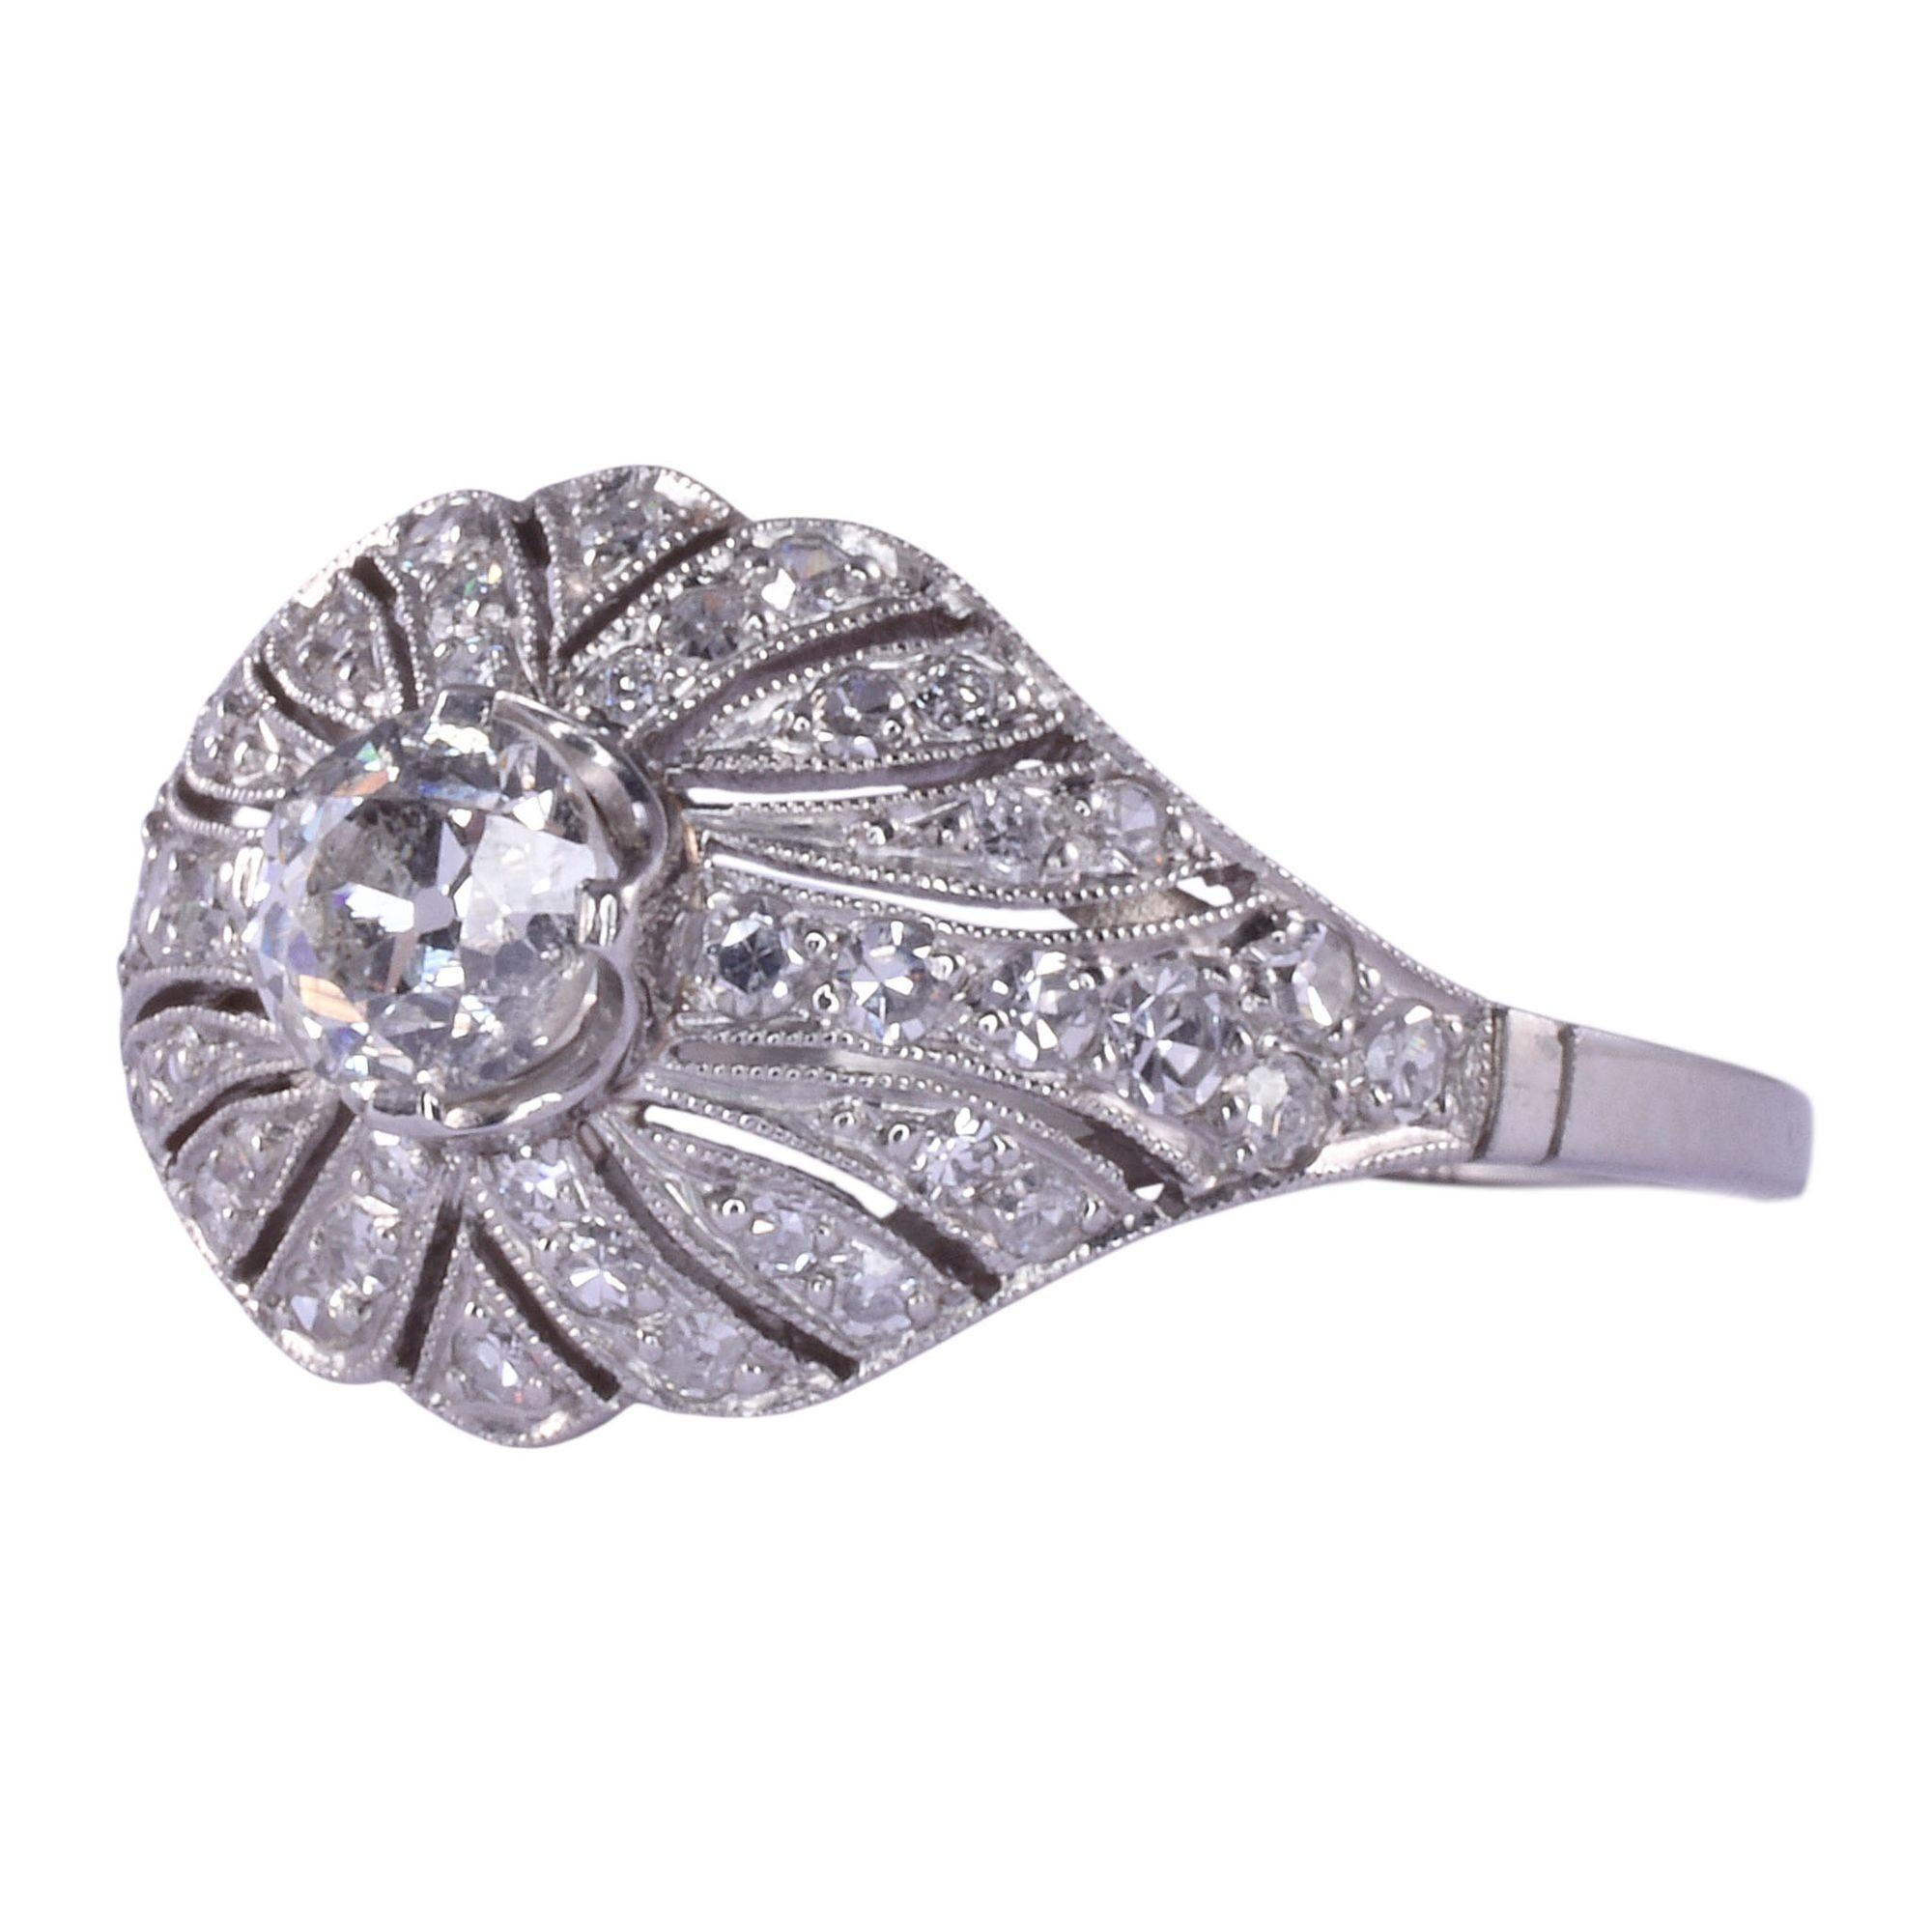 Antique Edwardian diamond filigree platinum ring, circa 1915. This antique filigree ring is crafted in platinum and features a .41 carat old European cut center diamond. The diamond has SI2 clarity and J color. This platinum ring also has single cut